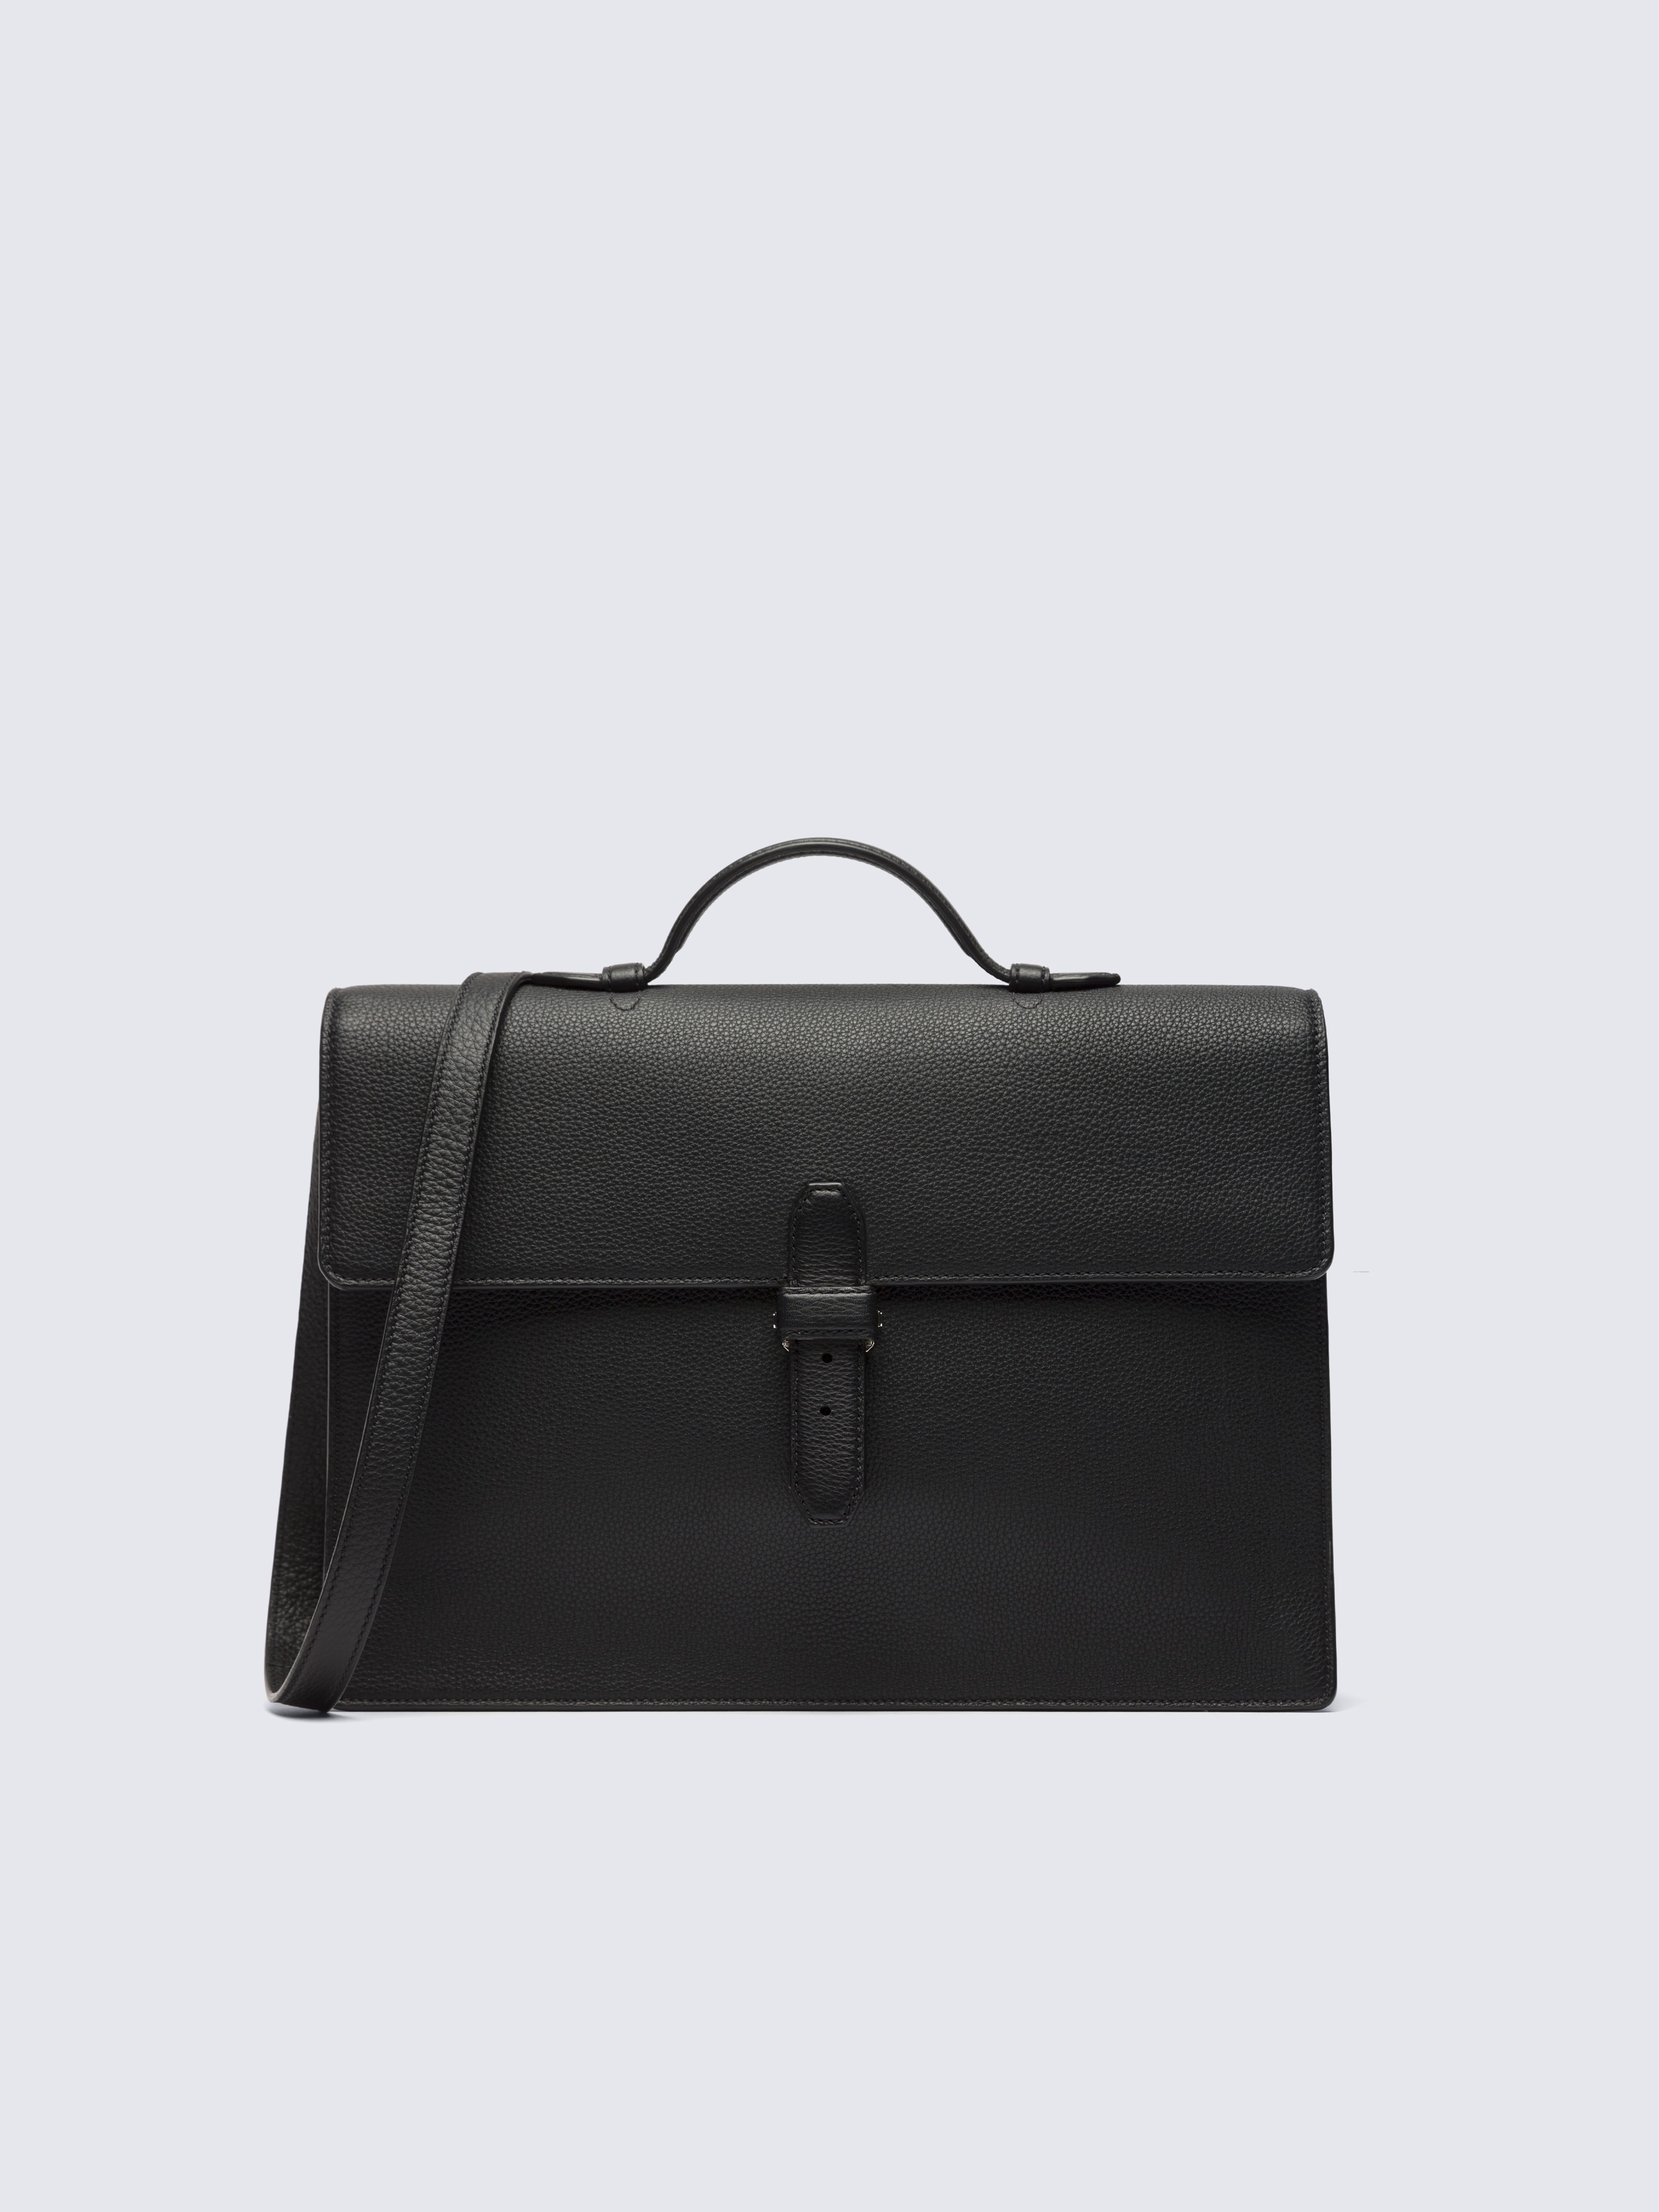 Belts & Leather Goods | Brioni® US Official Store